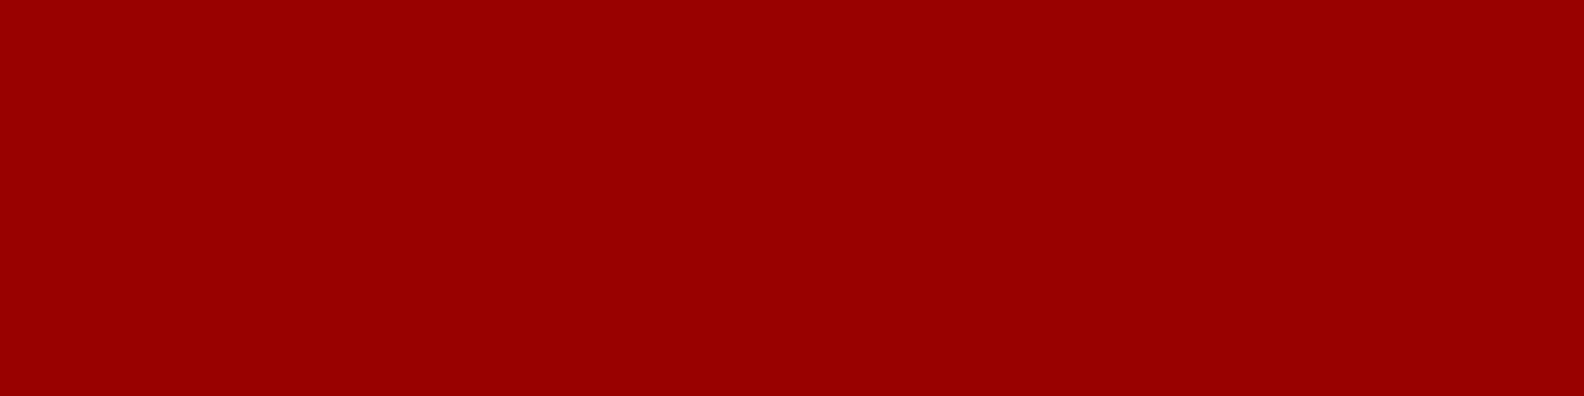 1584x396 OU Crimson Red Solid Color Background